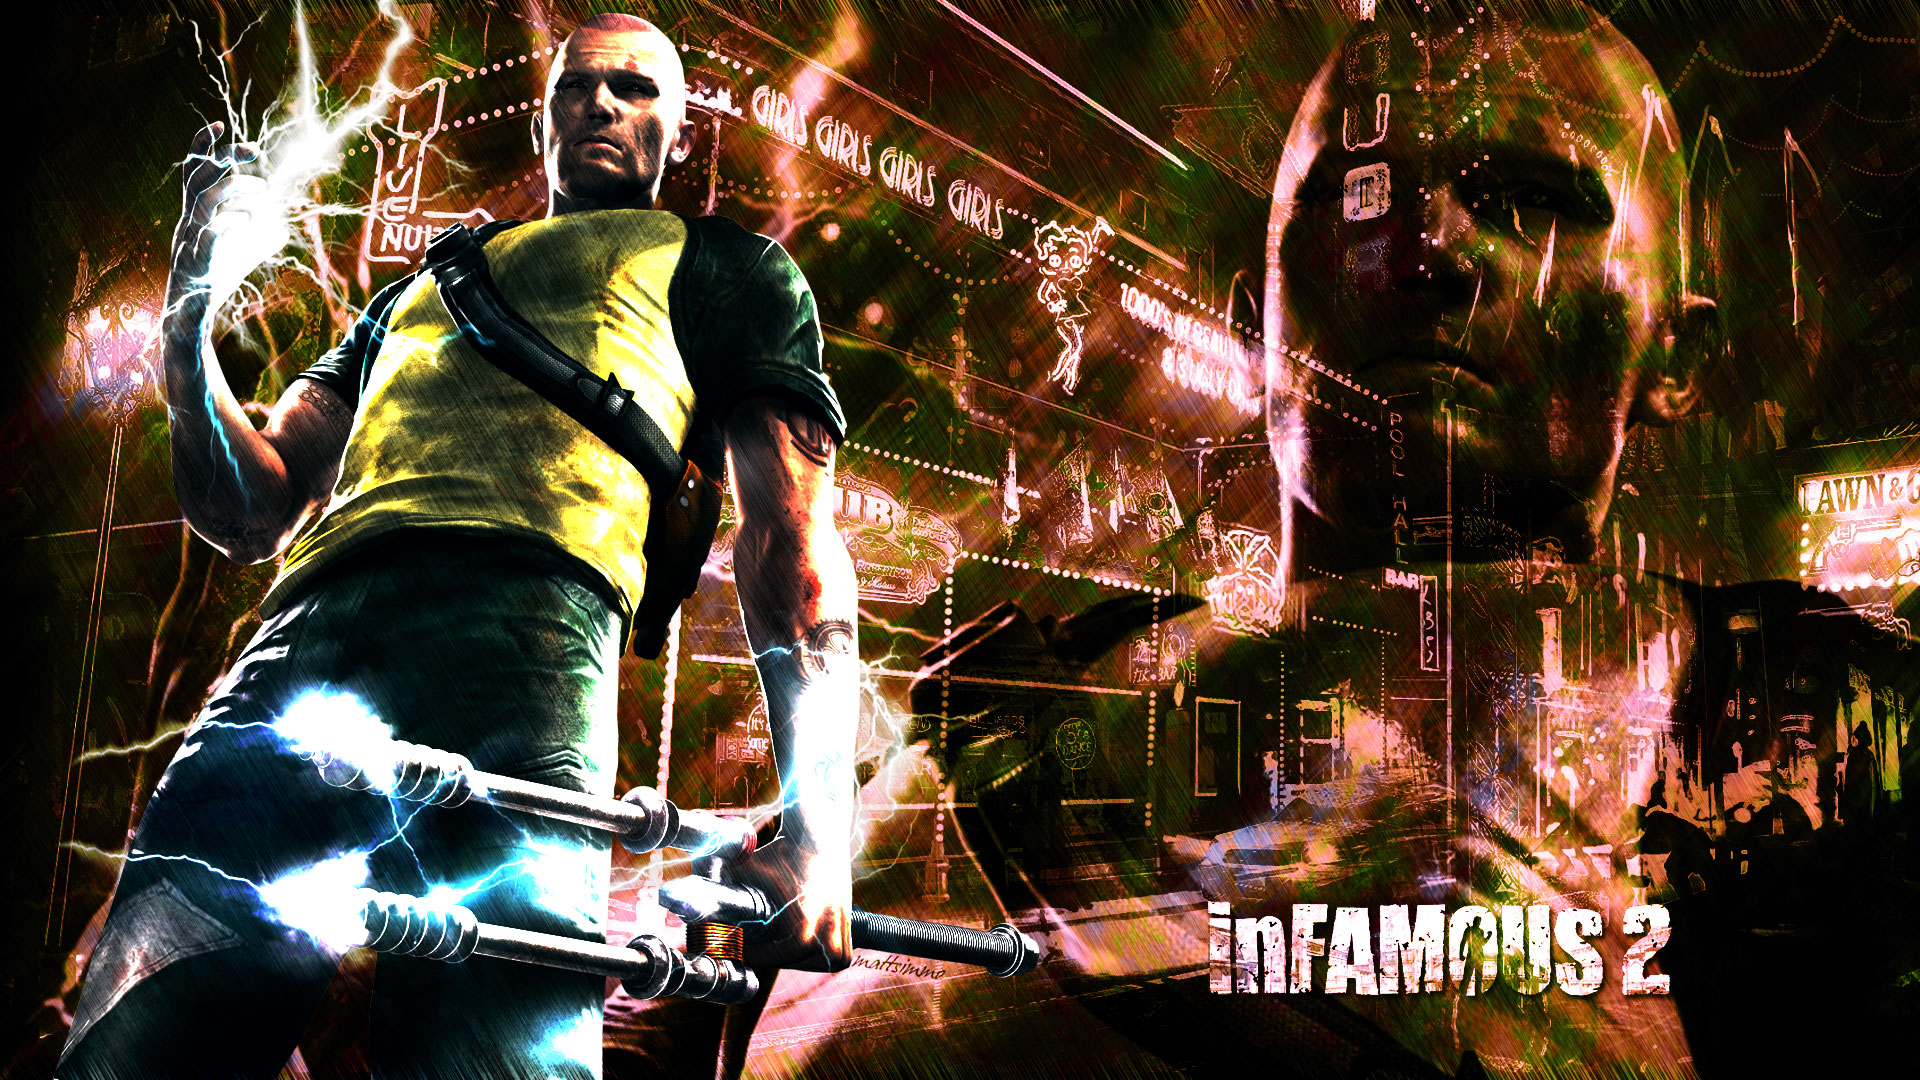 Video Game inFAMOUS 2 HD Wallpaper | Background Image